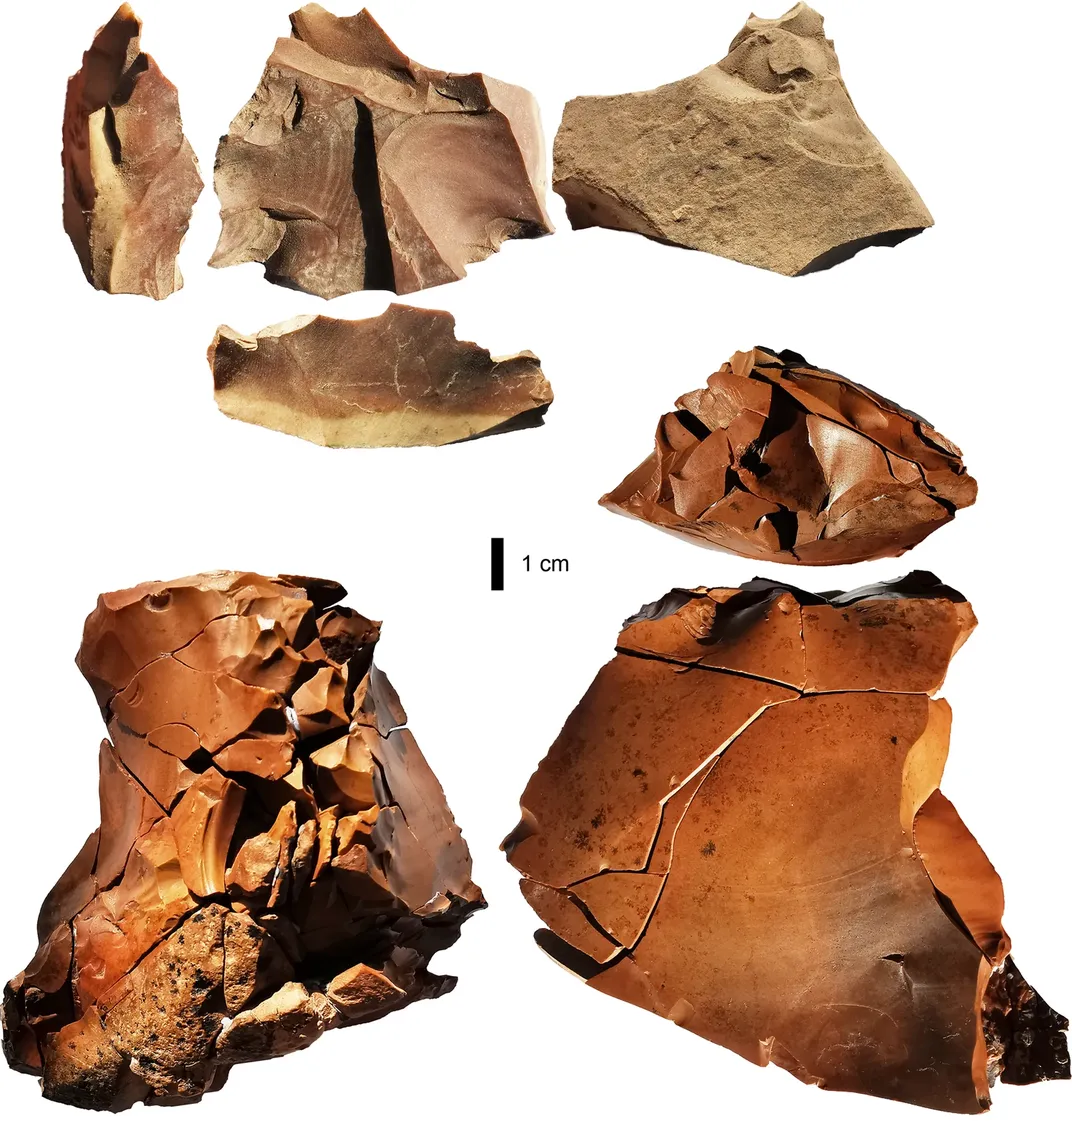 Close-up images of a notch tool discovered deep in the Laili cave in Timor-Leste.